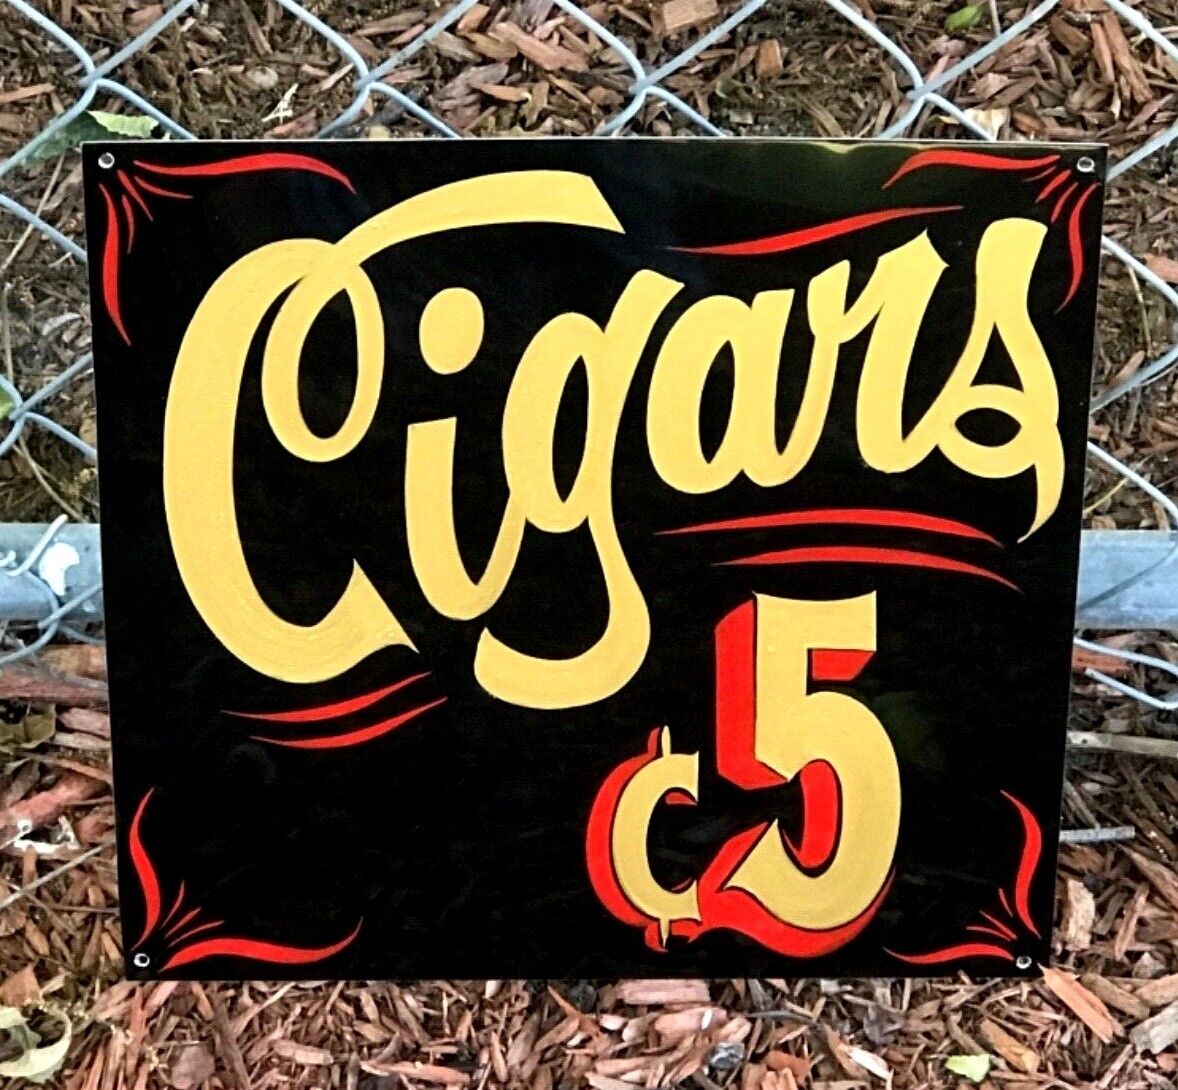 Vintage Hand Painted Lettered Tobacco Old 5 Cent Cigars Advertising Store Sign